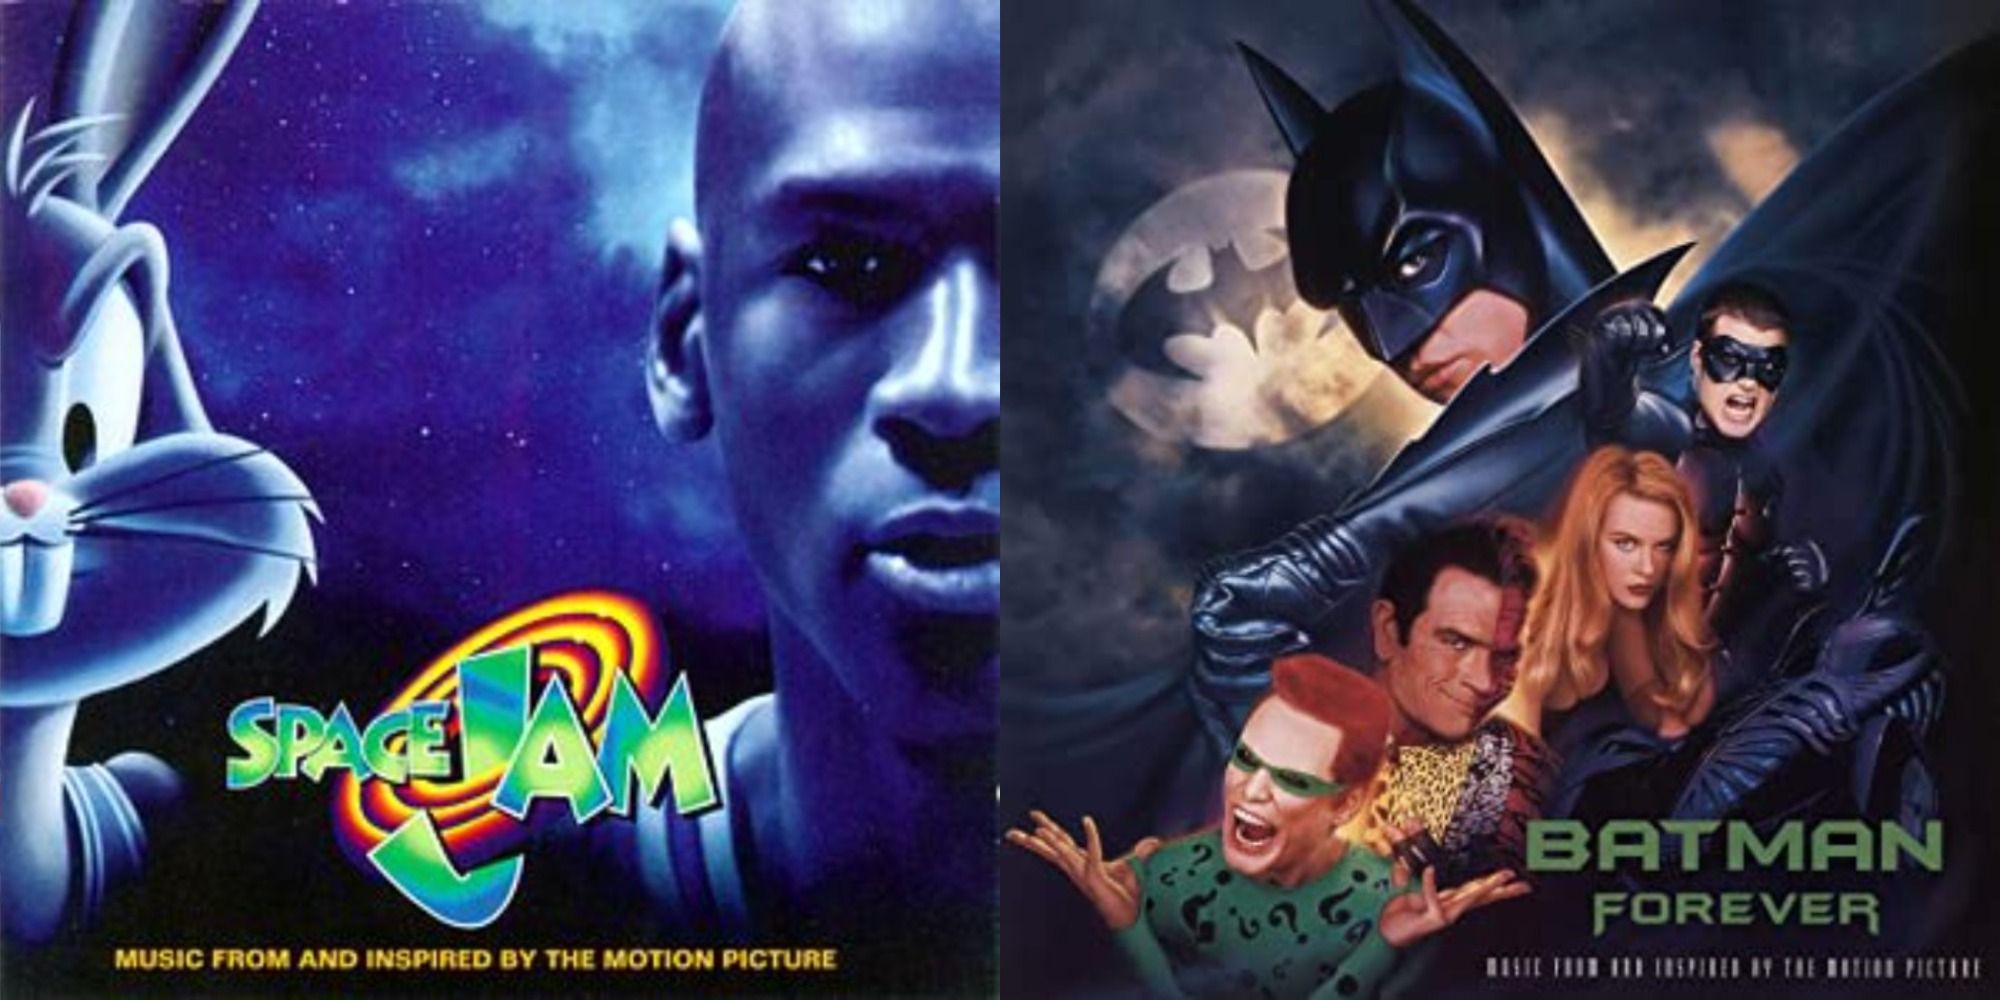 Split image of the album covers for the soundtracks to Space Jam and Batman Forever